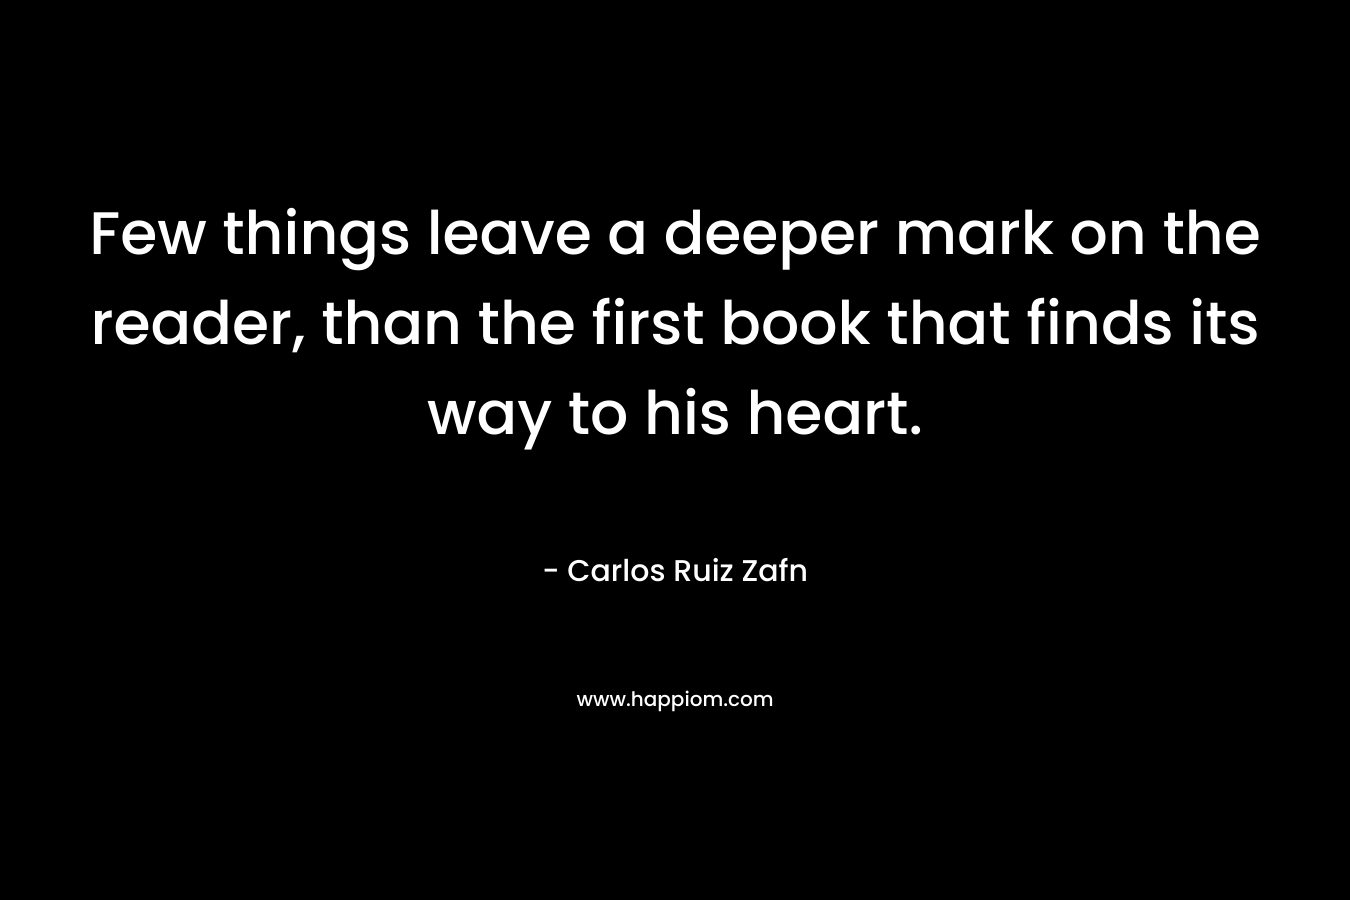 Few things leave a deeper mark on the reader, than the first book that finds its way to his heart.